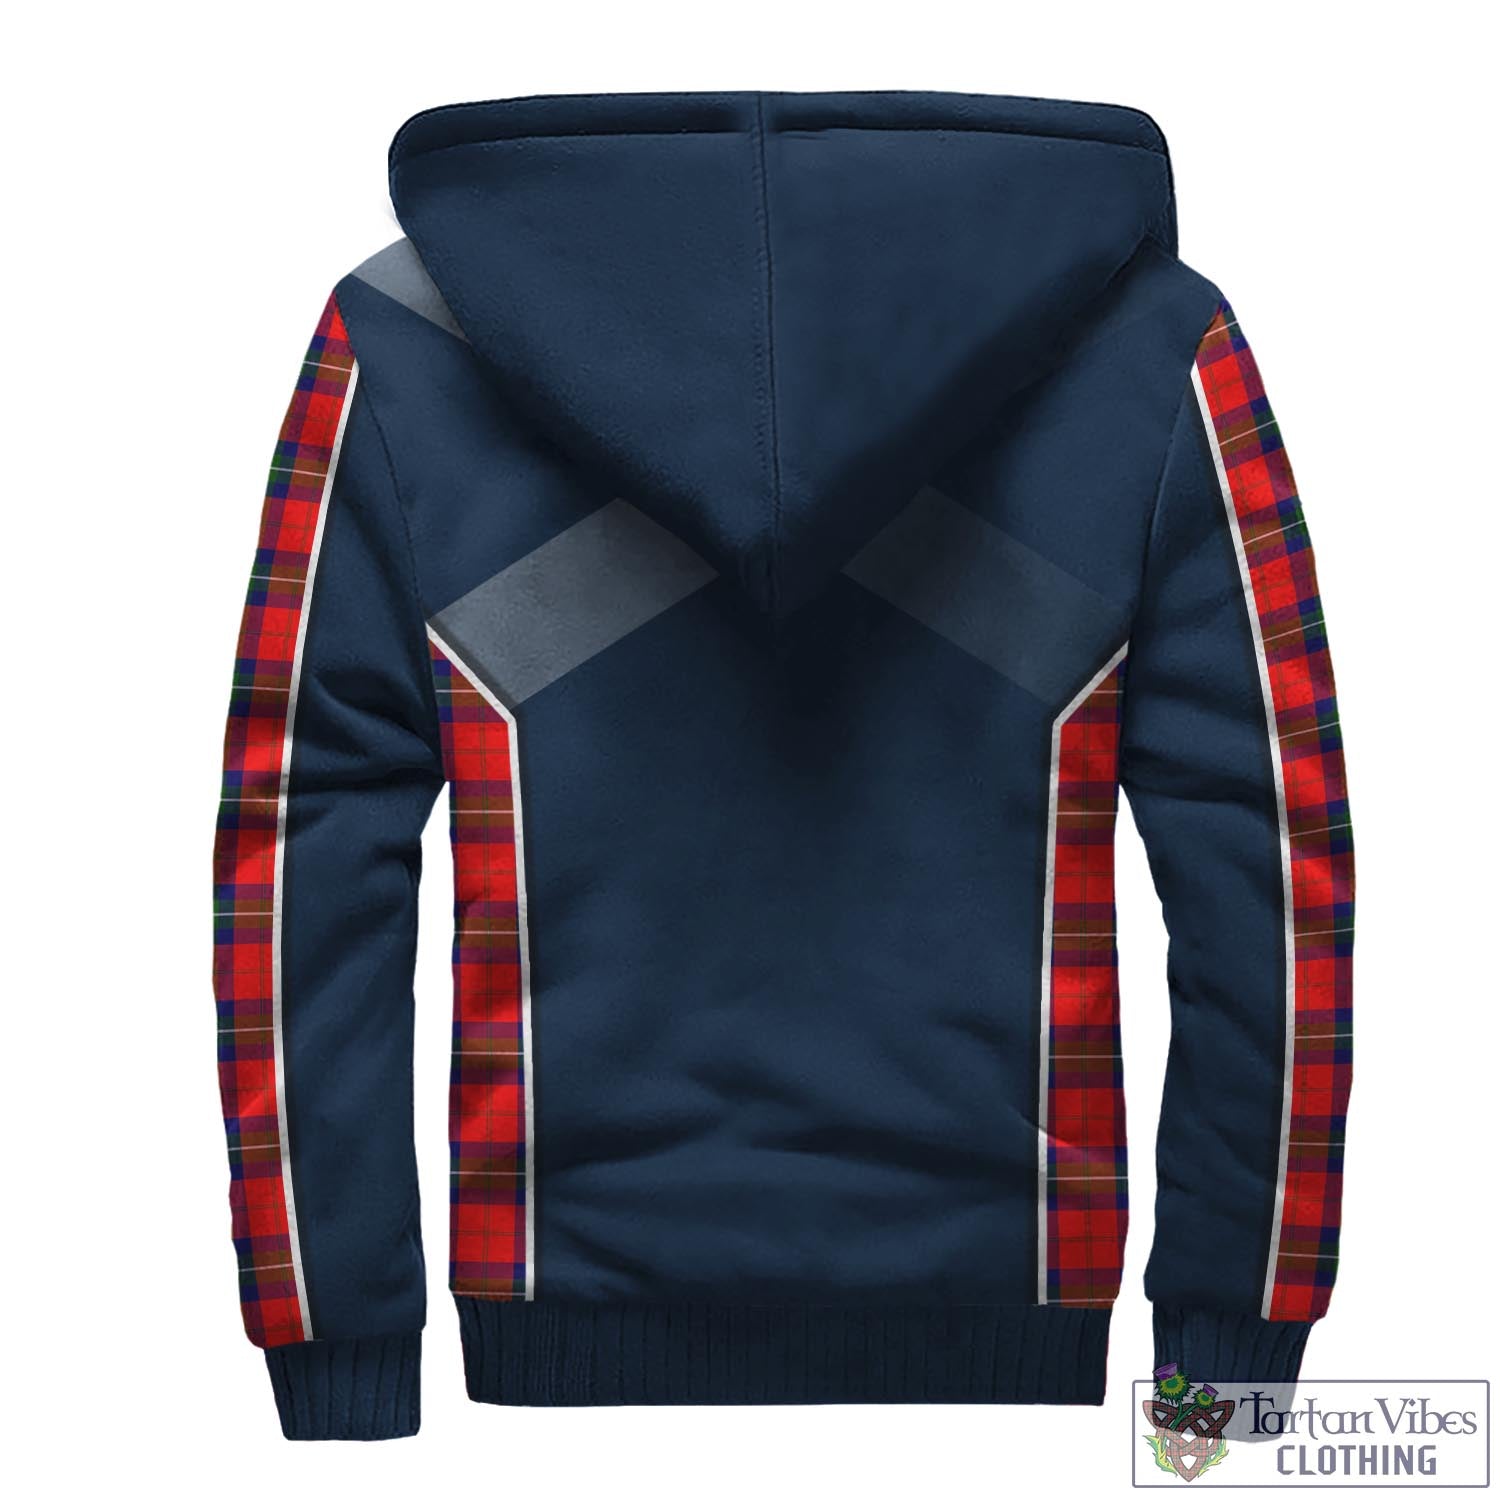 Tartan Vibes Clothing Ruthven Modern Tartan Sherpa Hoodie with Family Crest and Lion Rampant Vibes Sport Style